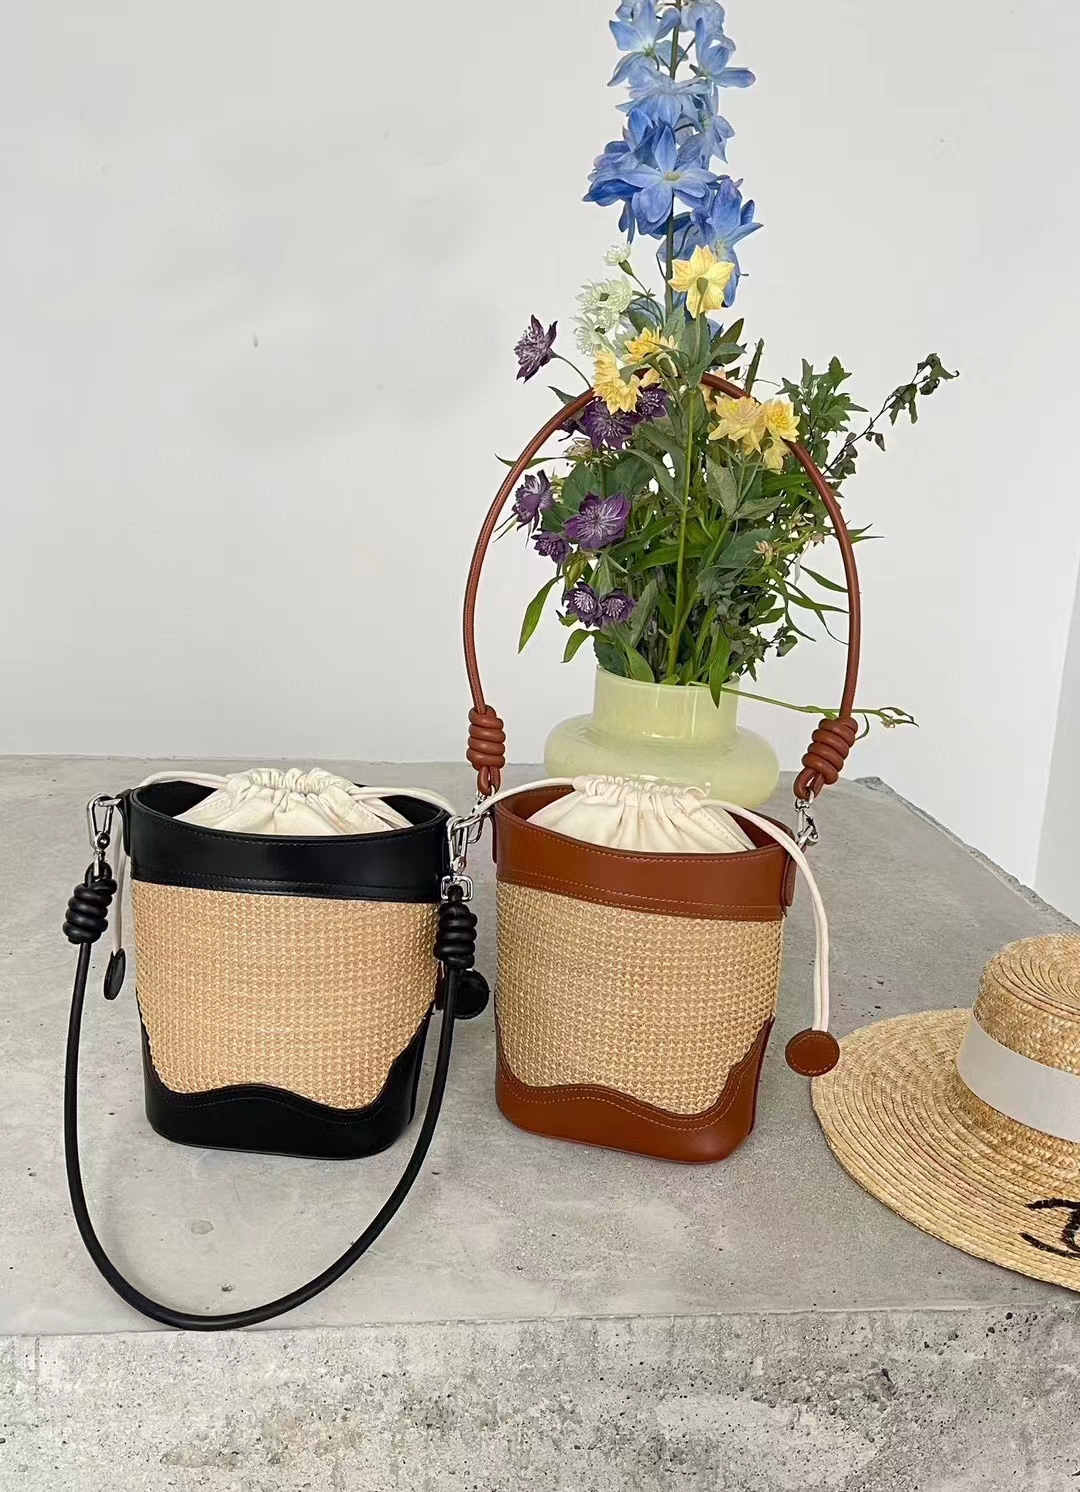 PP straw hobo bag with tassels